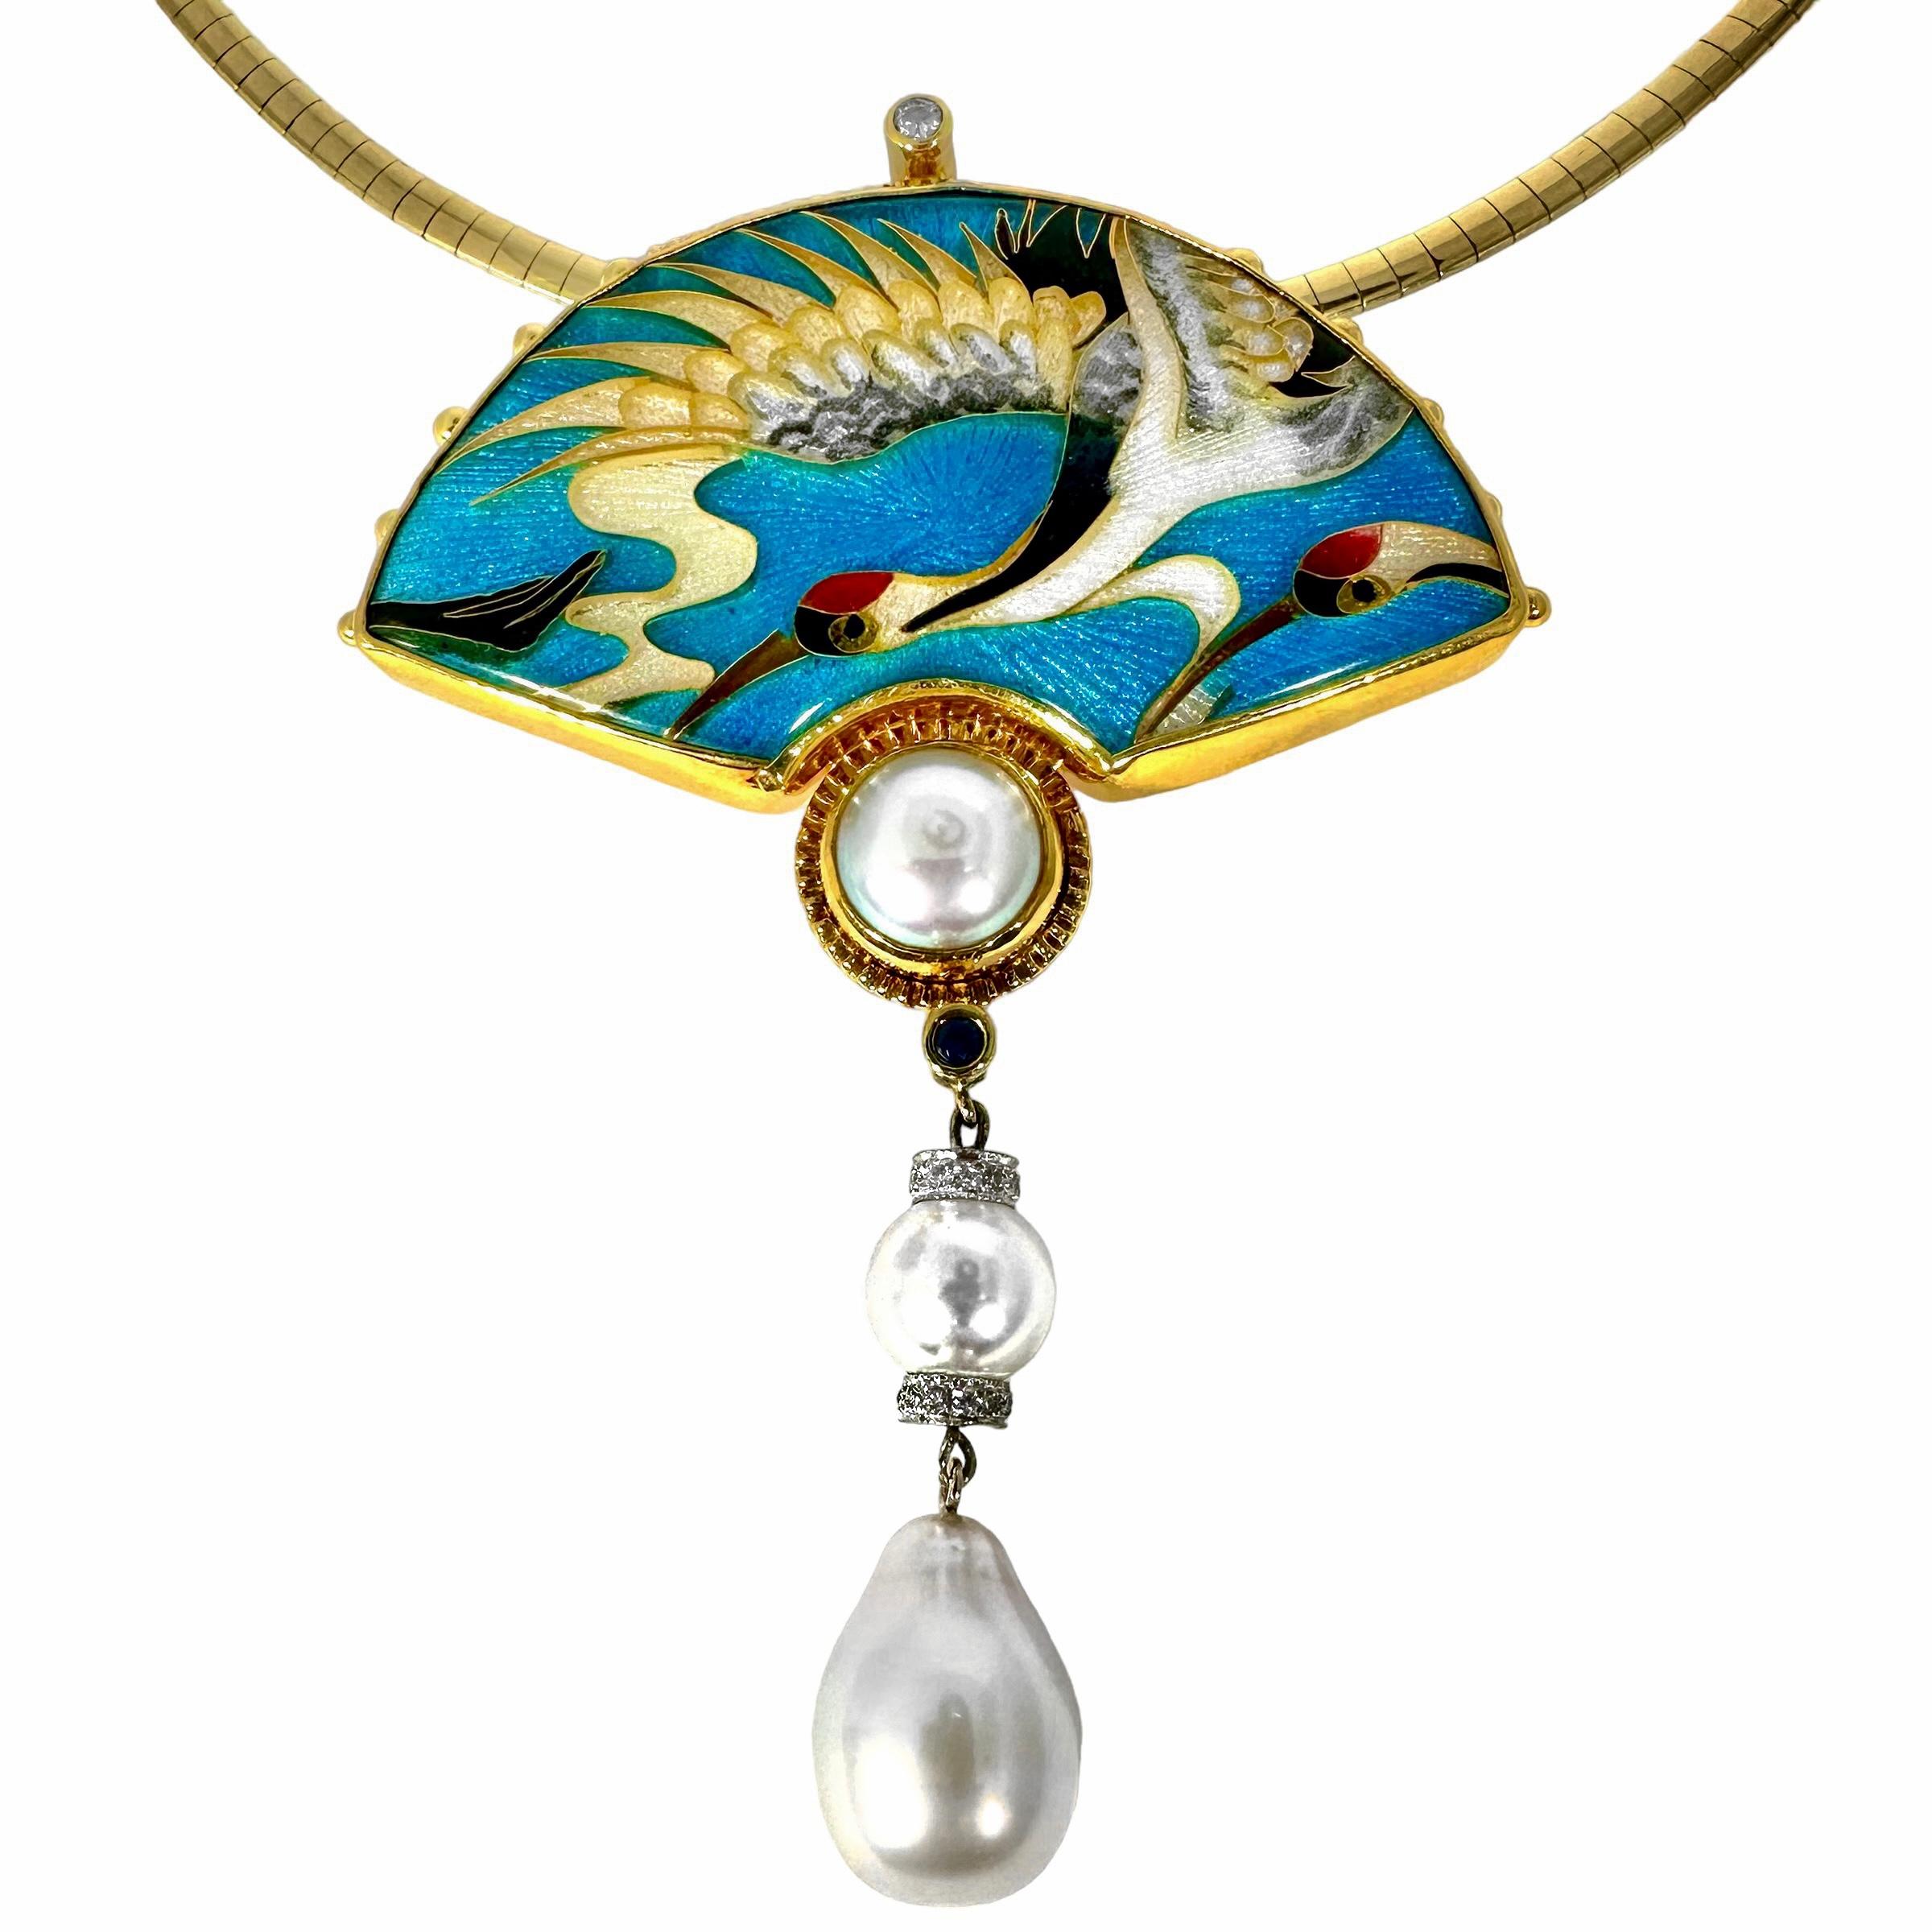 Women's Avian Fantasy Theme, Gold, Enamel, Pearl and Sapphire Pendant by Tricia Young For Sale